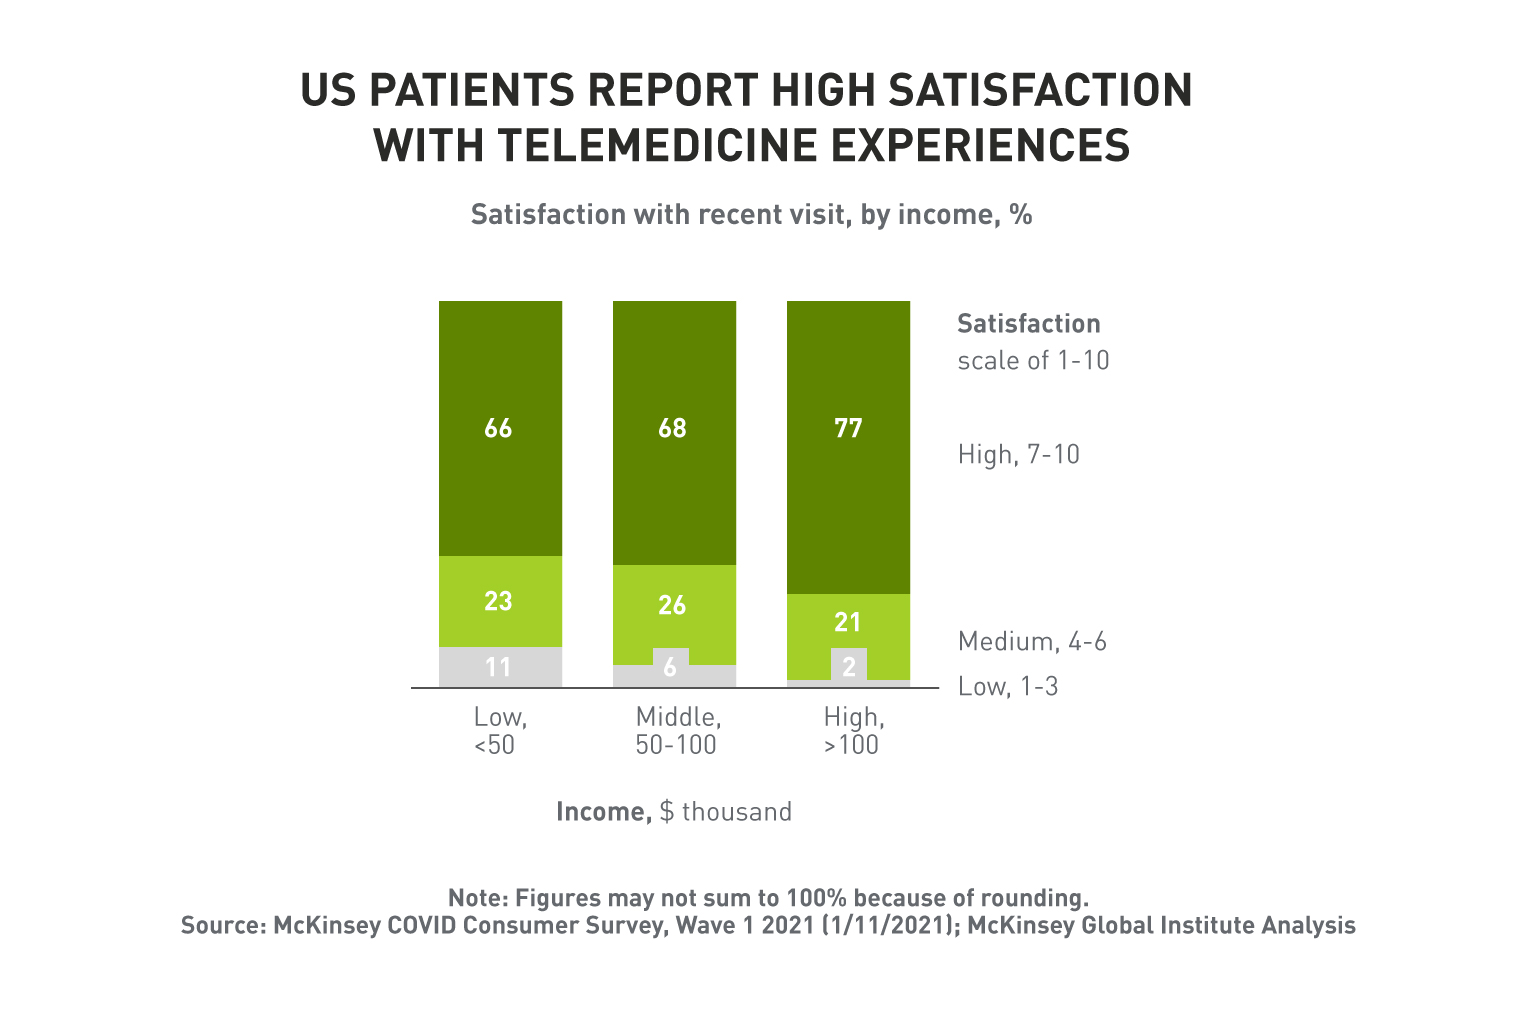 US PATIENTS REPORT HIGH LEVEL OF SATISFACTION WITH TELEMEDICINE APPOINTMENTS